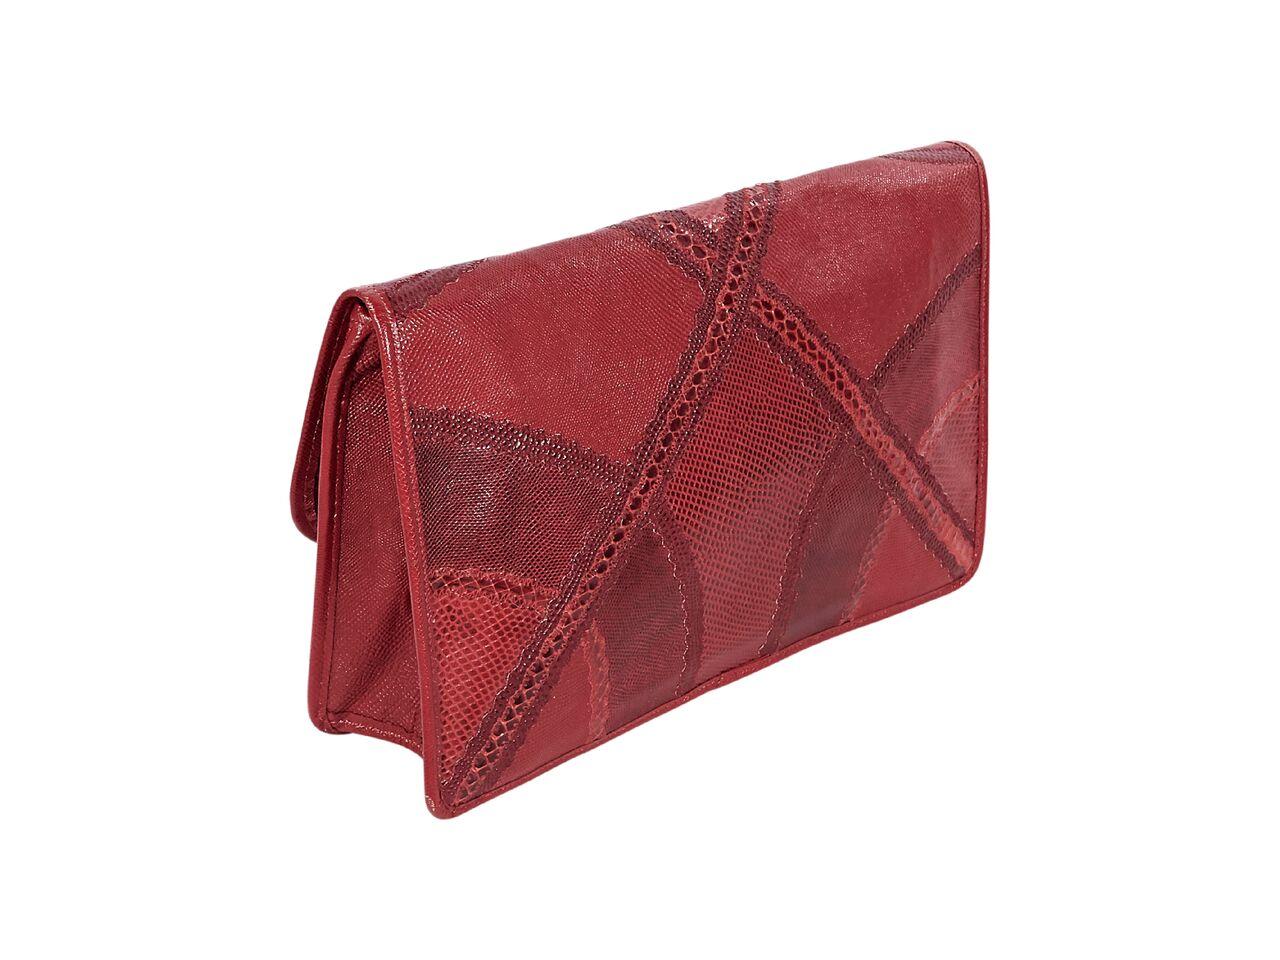 Product details:  Vintage red large exotic skin clutch by Carlos Falchi.  Front flap with concealed magnetic snap closure.  Lined interior with inner slide pocket.  13.25